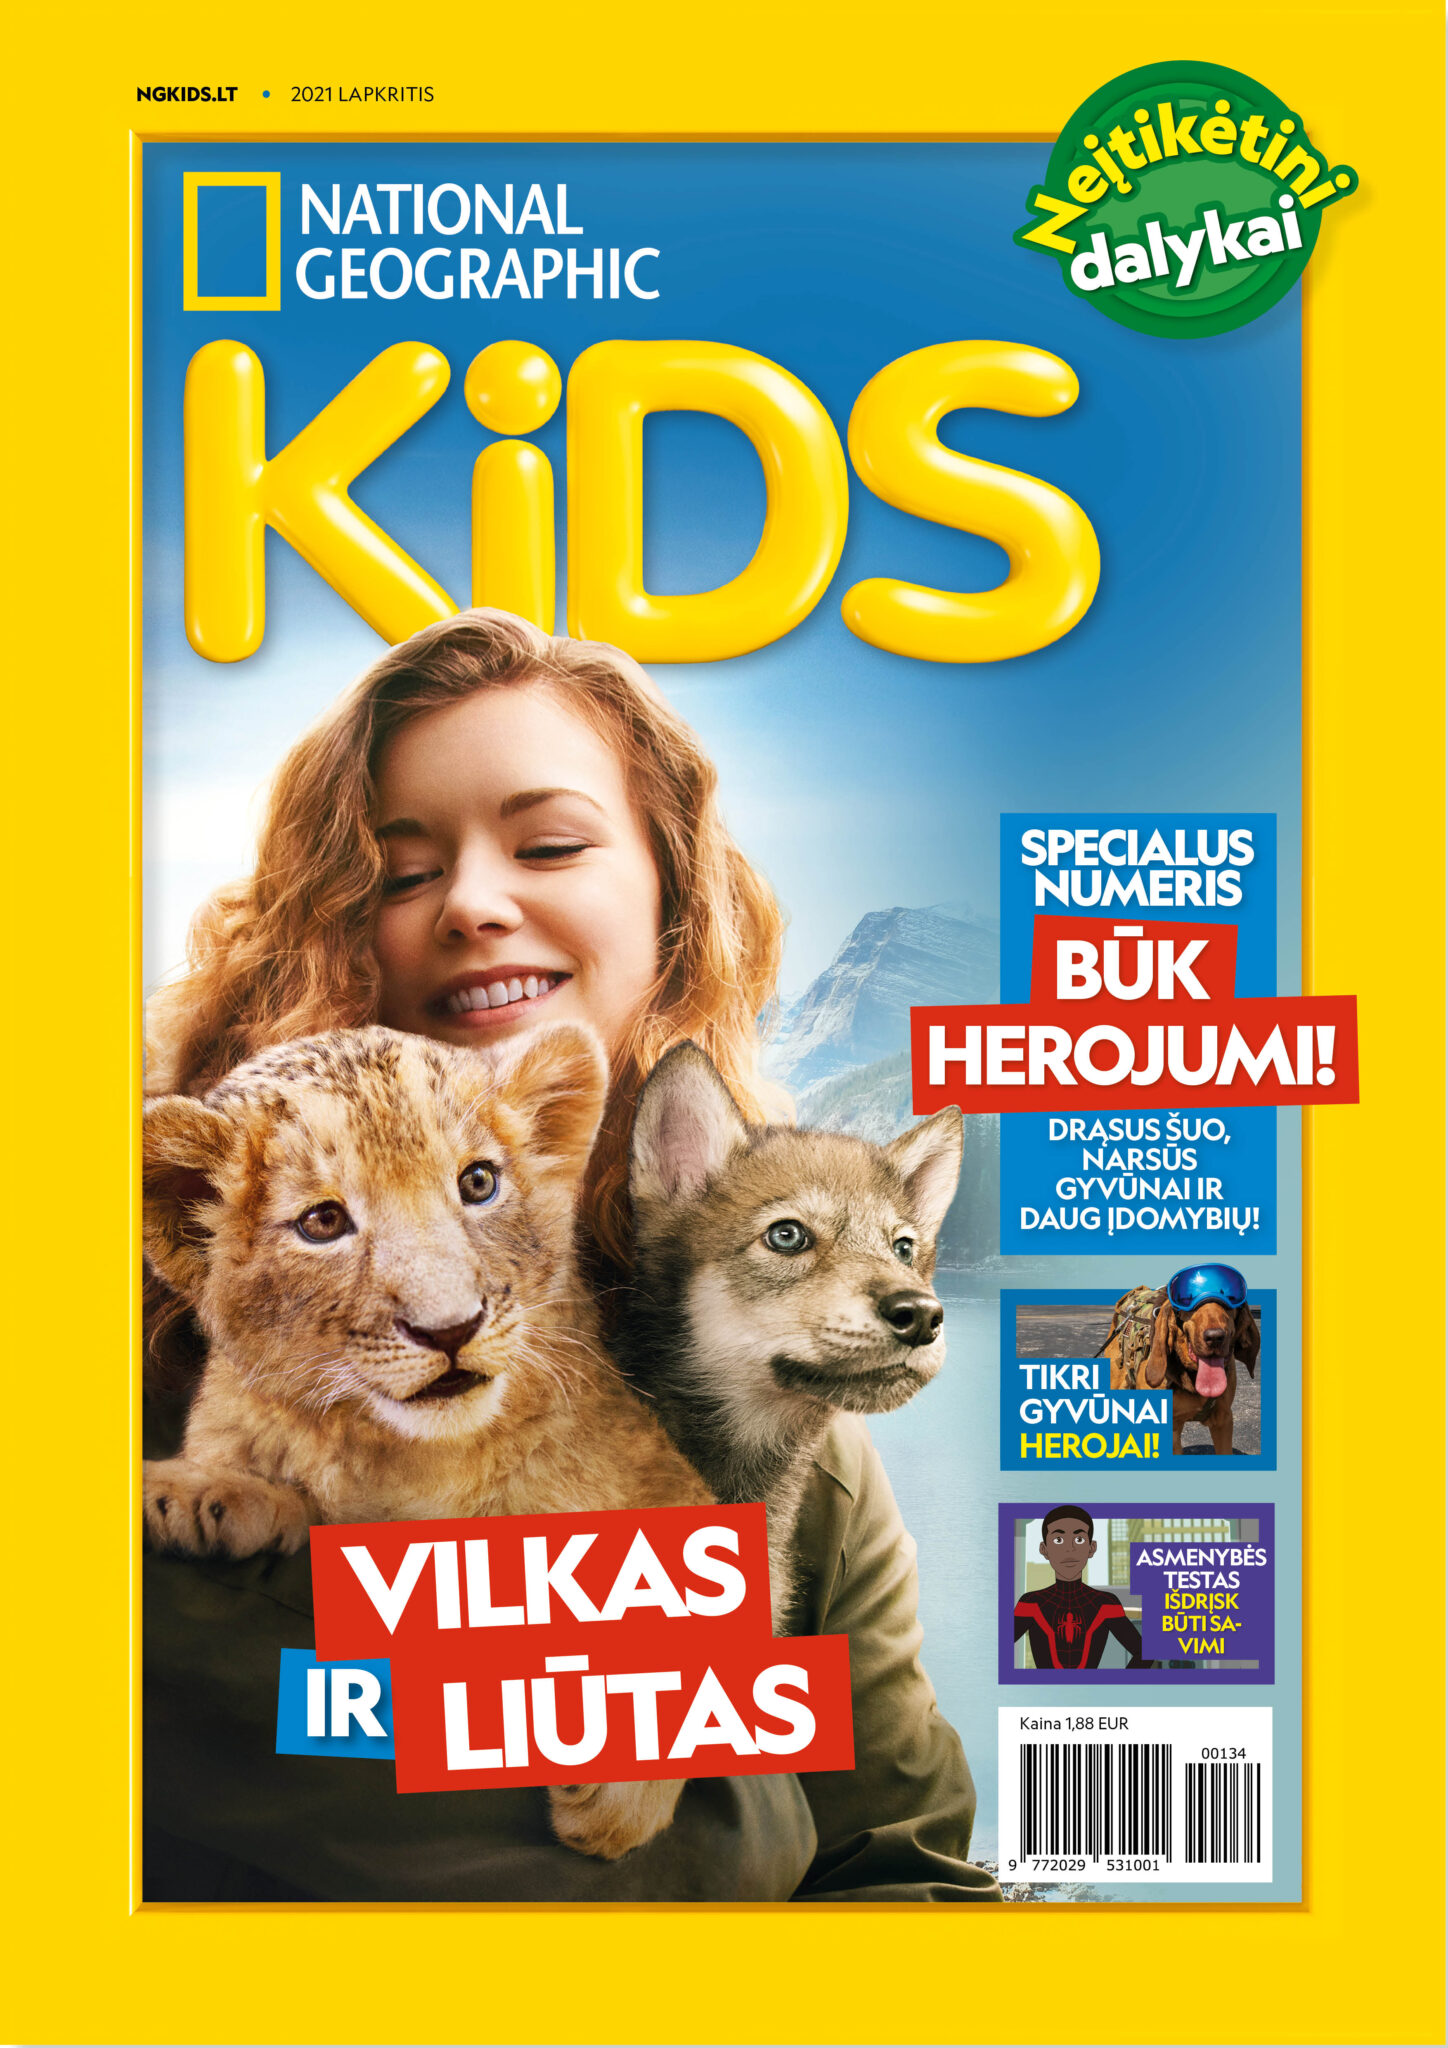 National Geographic Kids 2021 lapkritis National Geographic